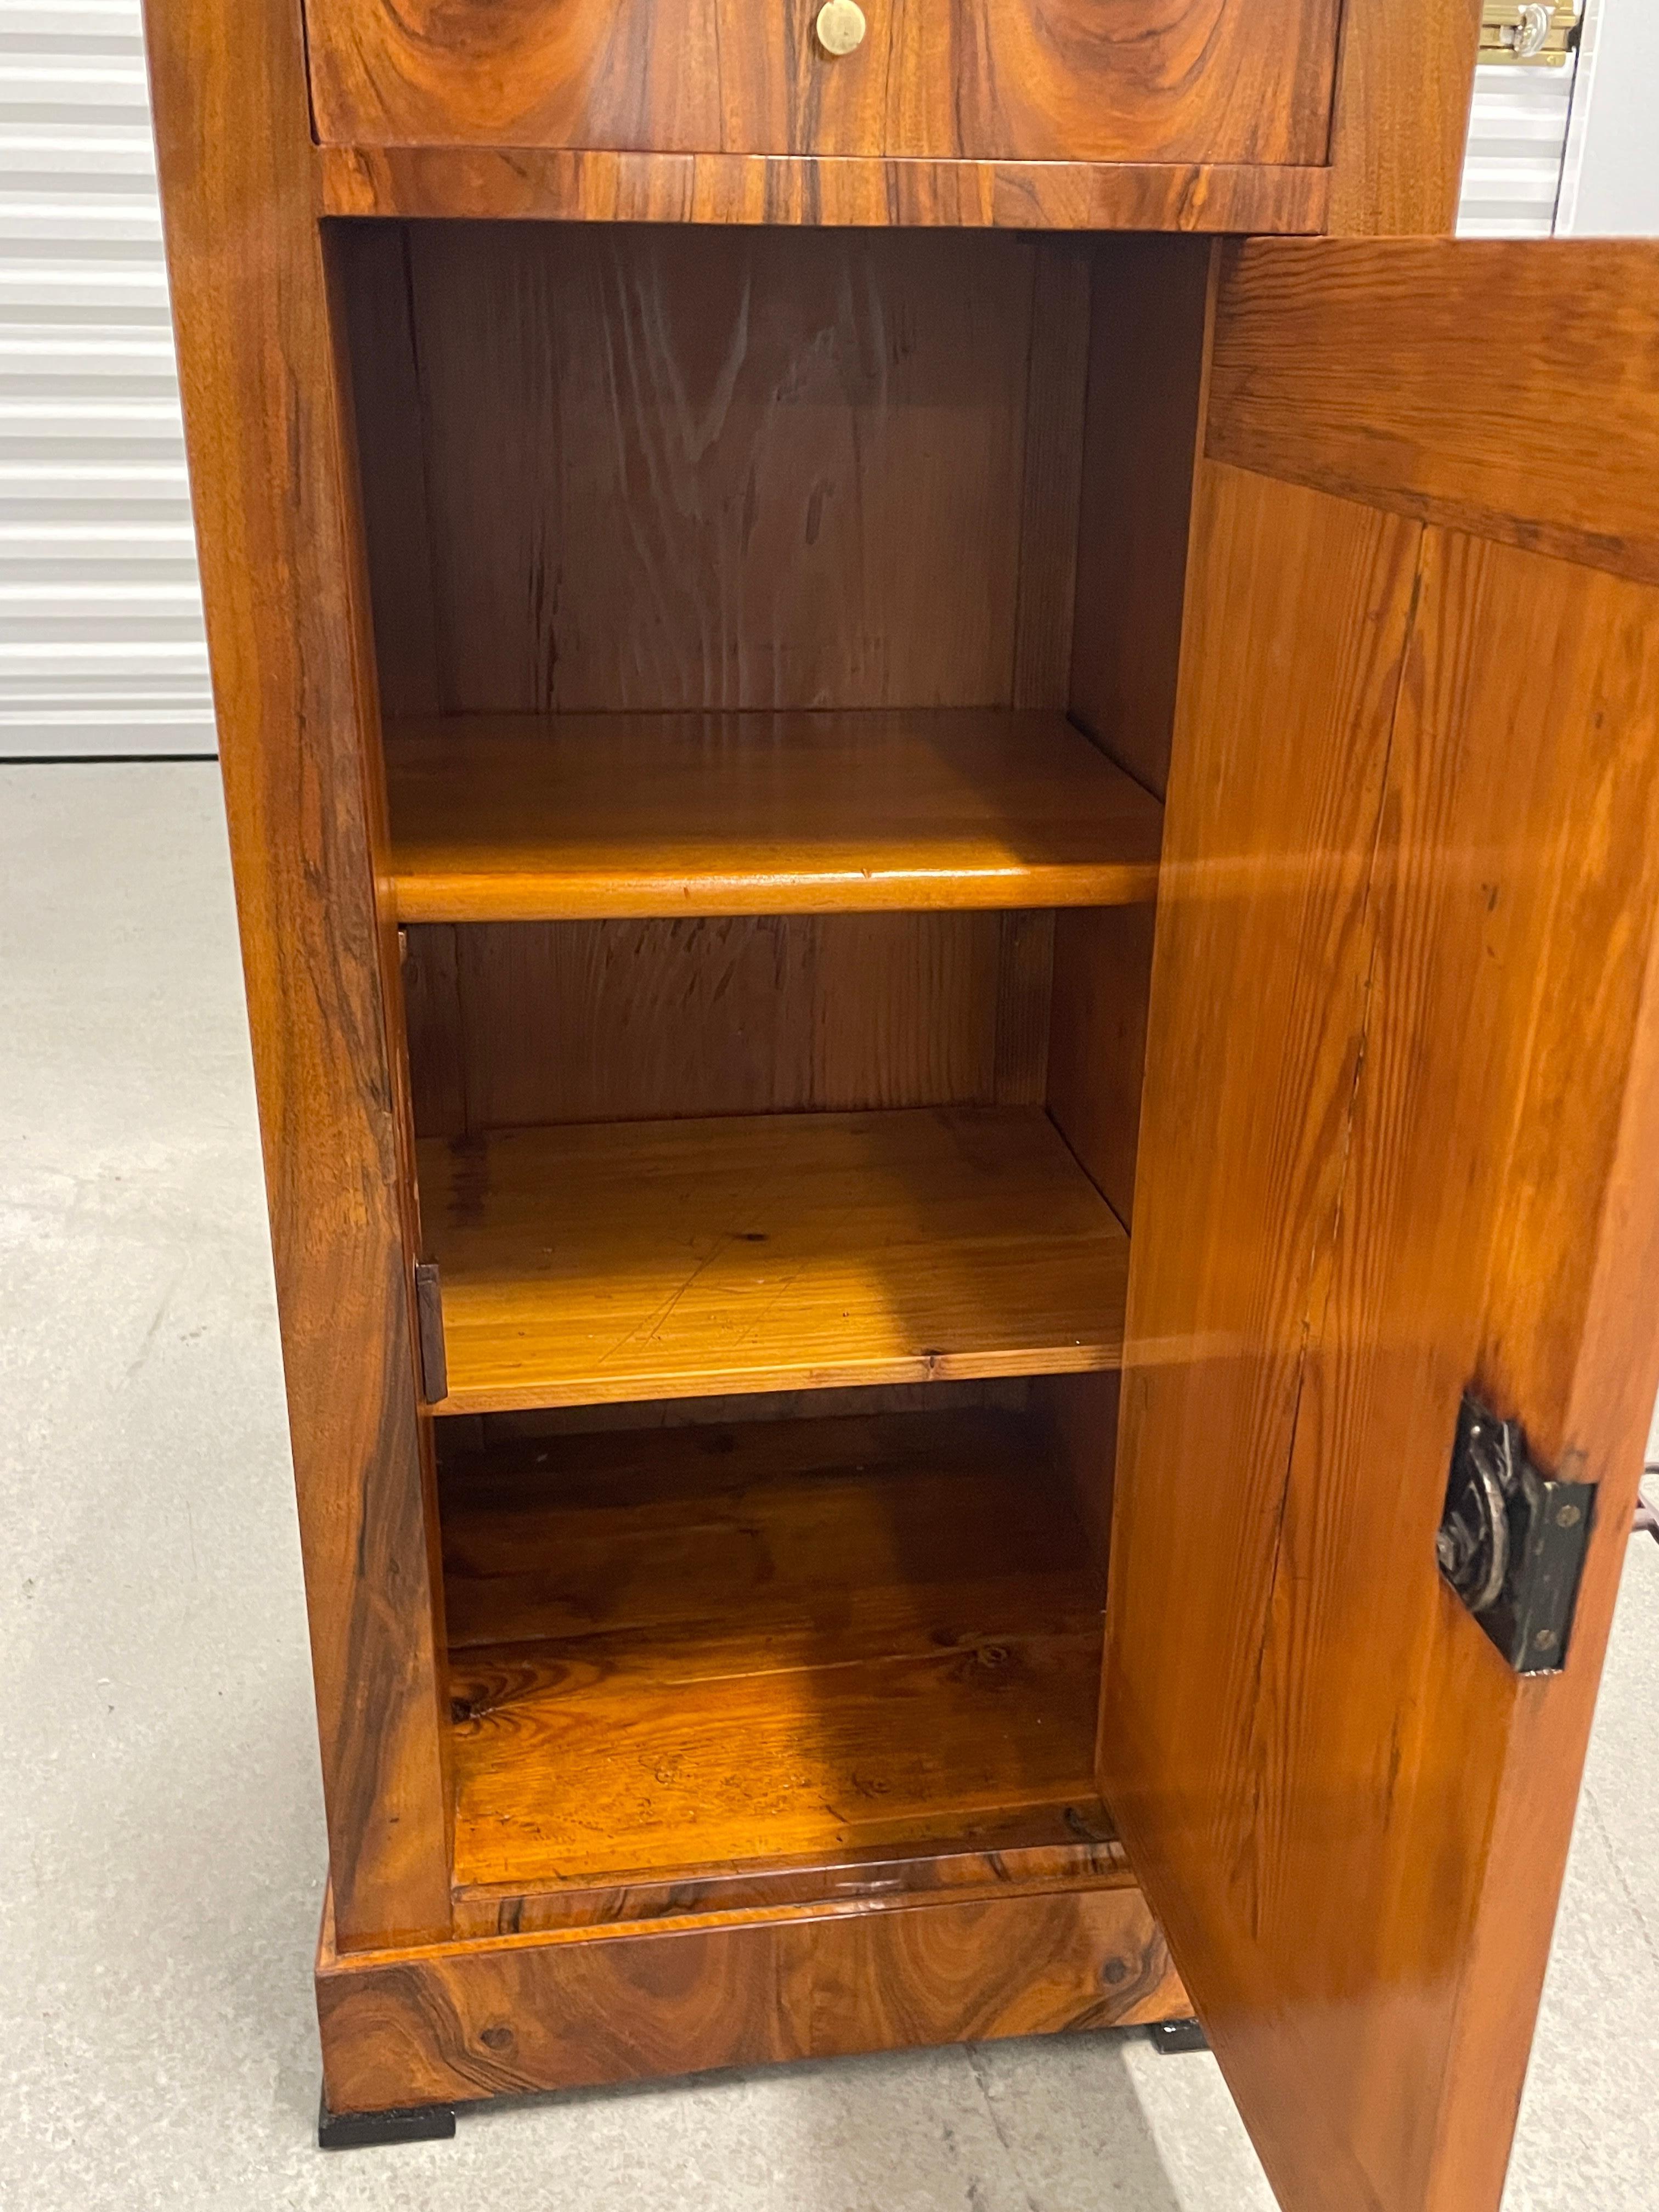 This original 19th century Biedermeier Nightstand has a very pretty walnut veneer. 
The small cabinet has one door, behind the door is a shelf. Above the door is a drawer. The Biedermeier Nightstand is in very good refinished condition. It has a